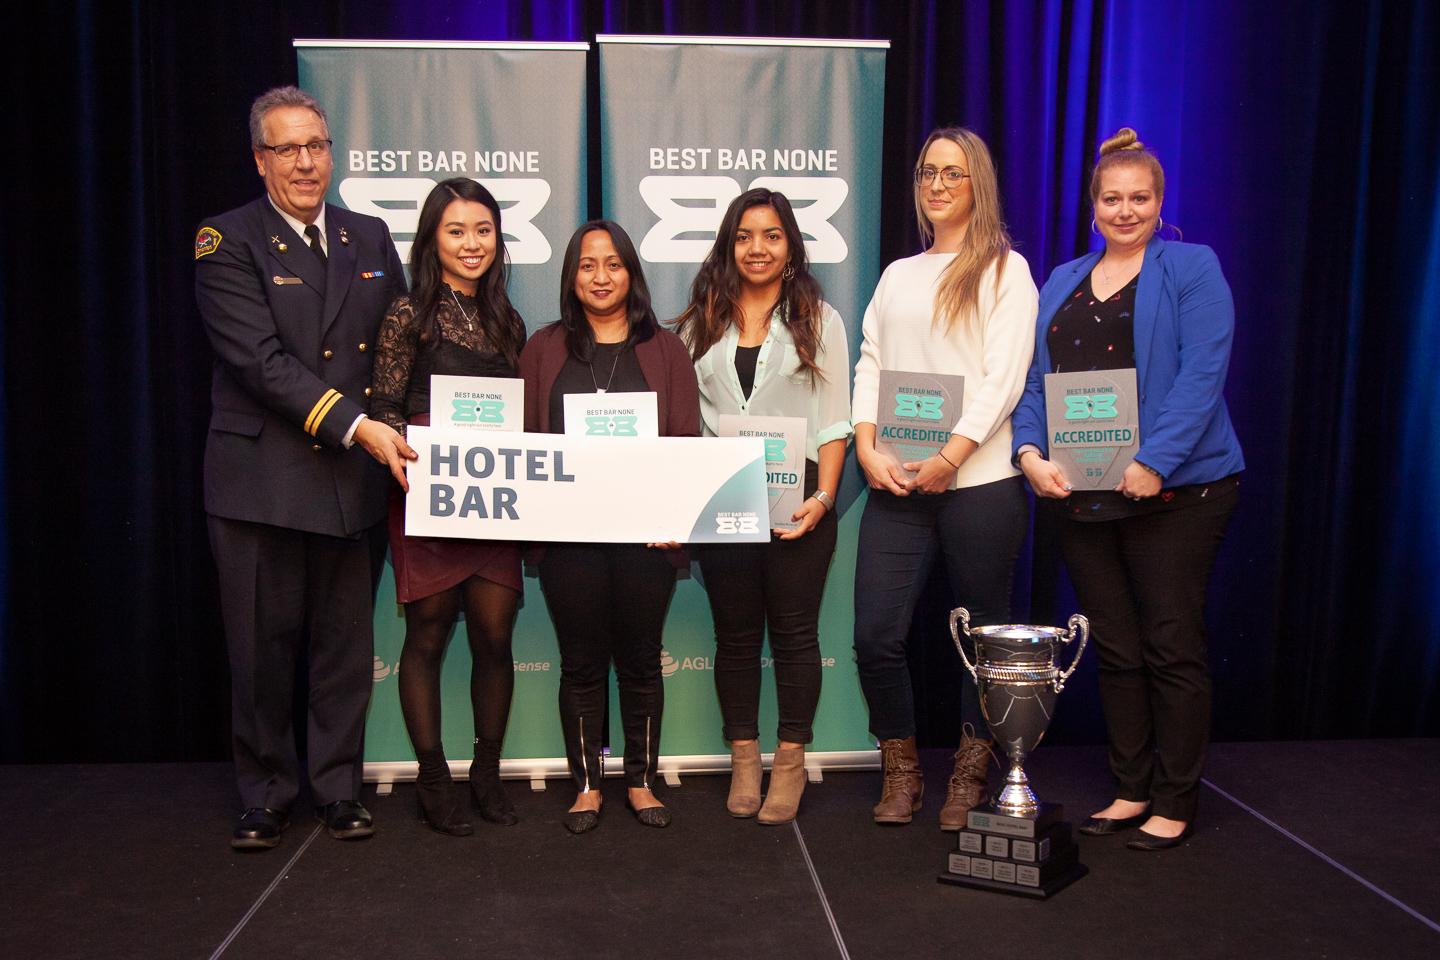 Congrats to all the Hotel Bars for their continued efforts to make Edmonton’s nightlife safer and more vibrant. The host venue Lion’s Head Pub were awarded the best this year.